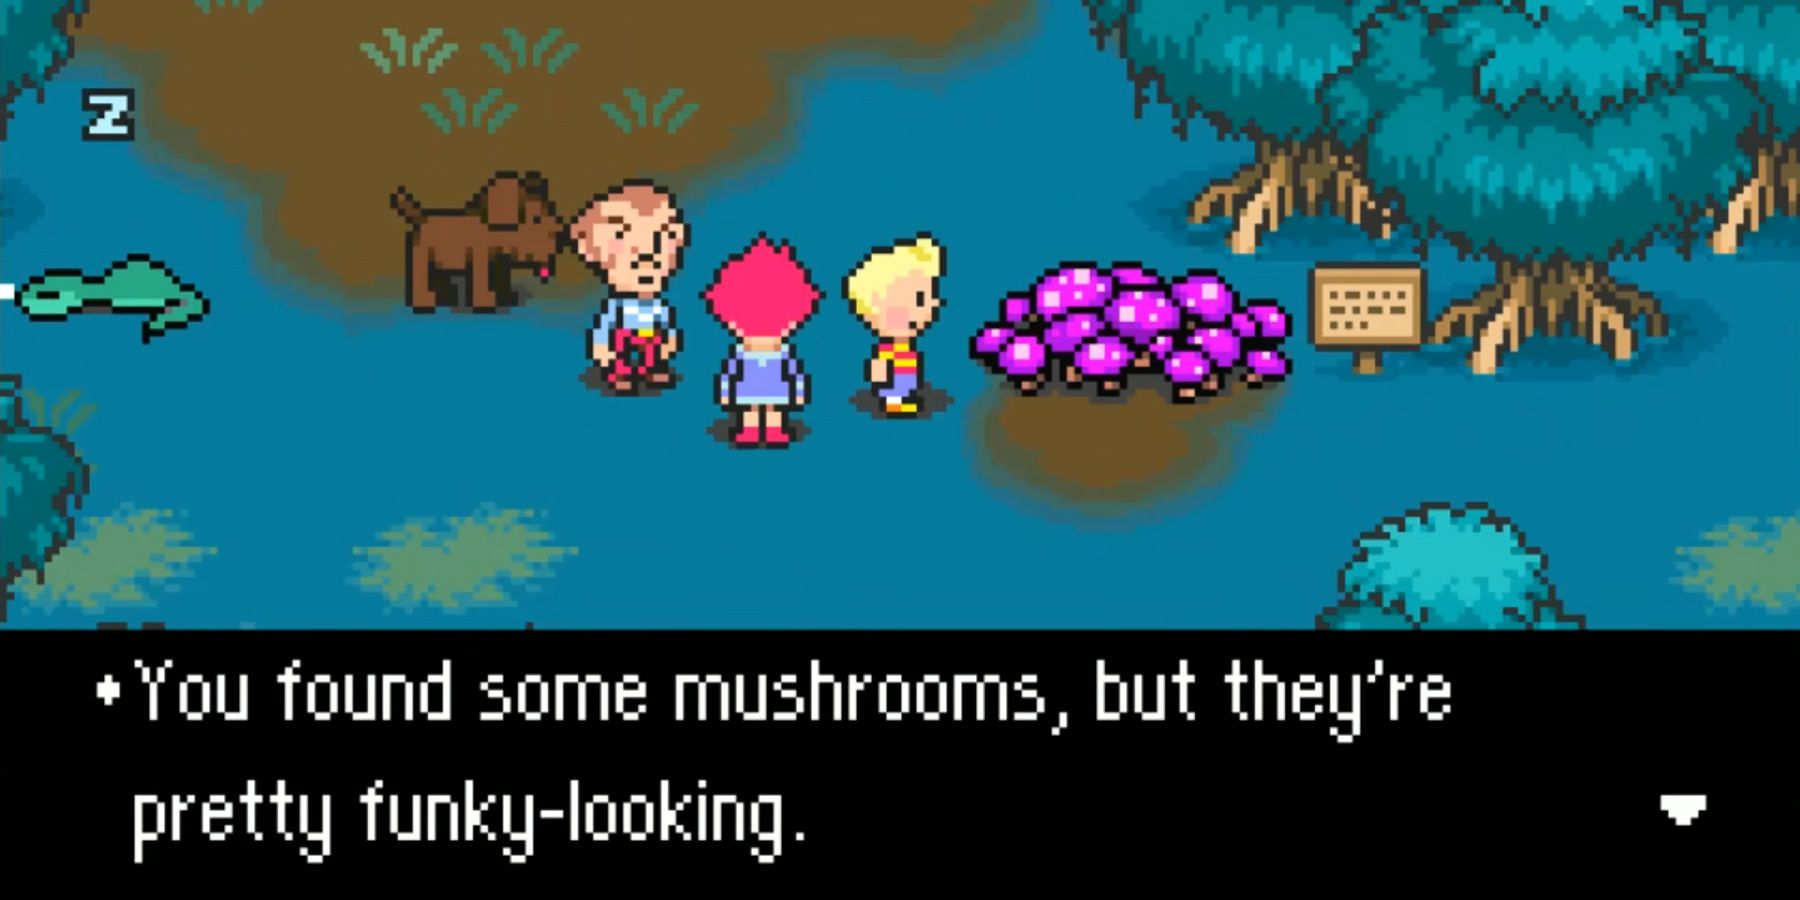 Lucas and the rest of the Mother 3 gang stumble upon funky-looking mushrooms in a forest.